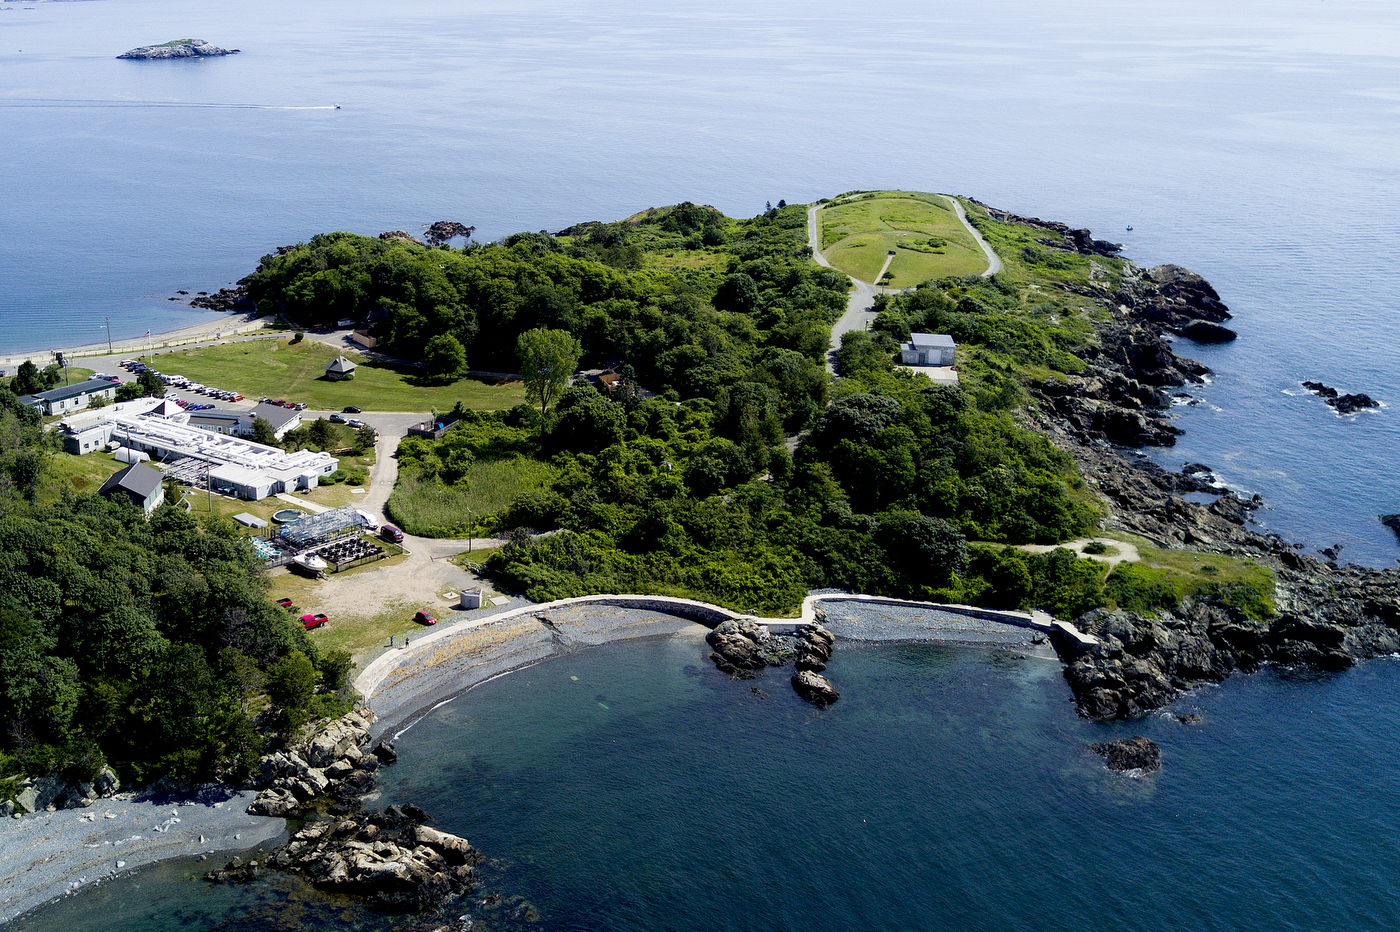 Nahant from above